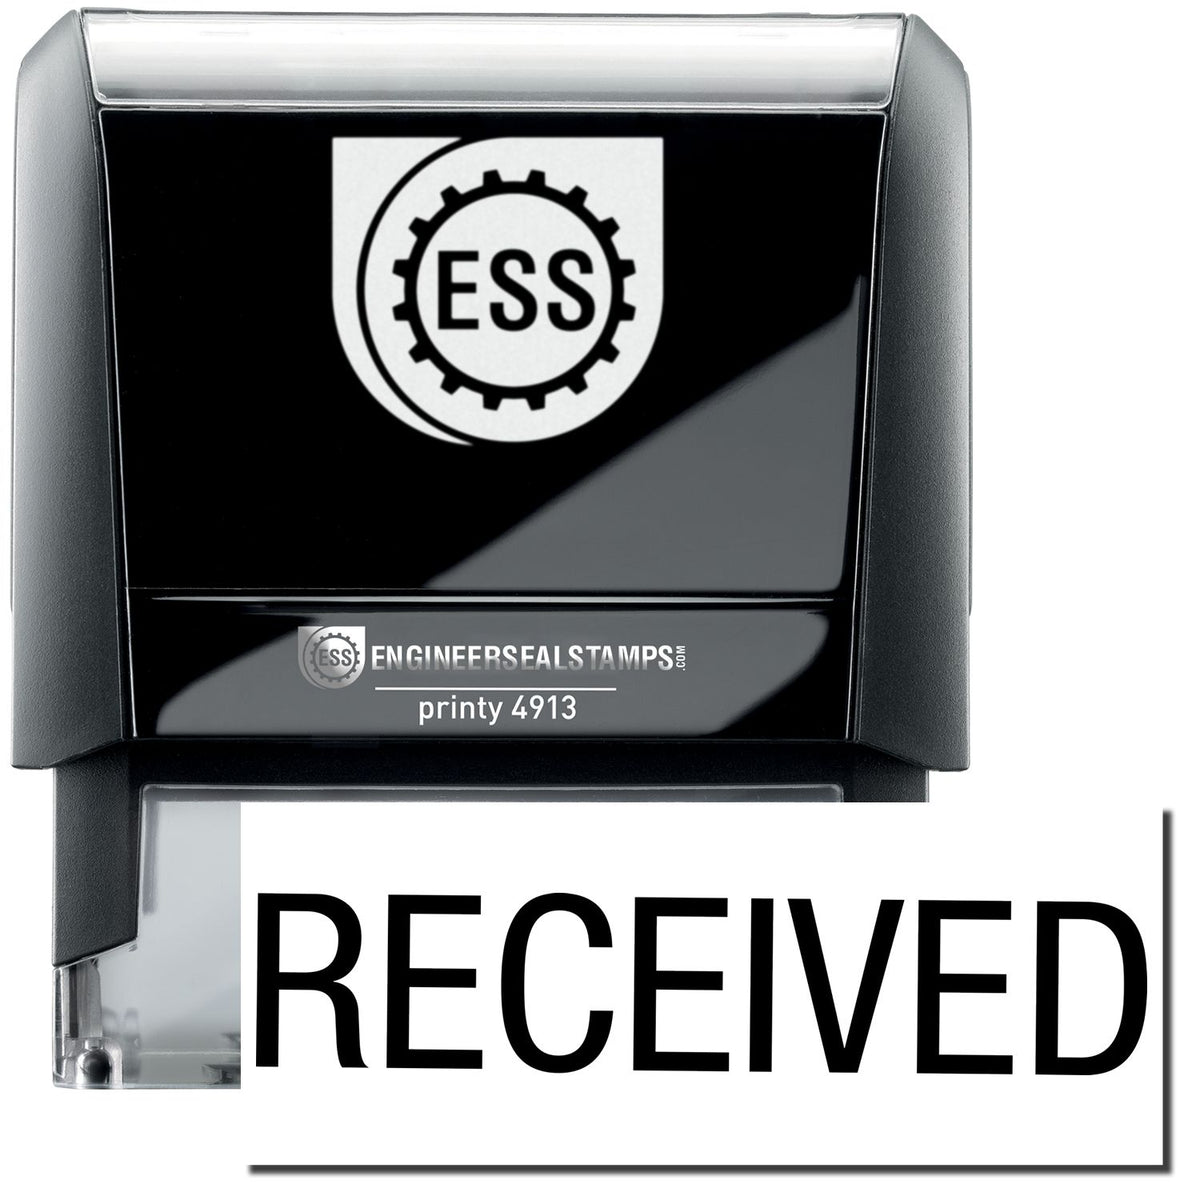 A self-inking stamp with a stamped image showing how the text &quot;RECEIVED&quot; in a large font is displayed by it after stamping.